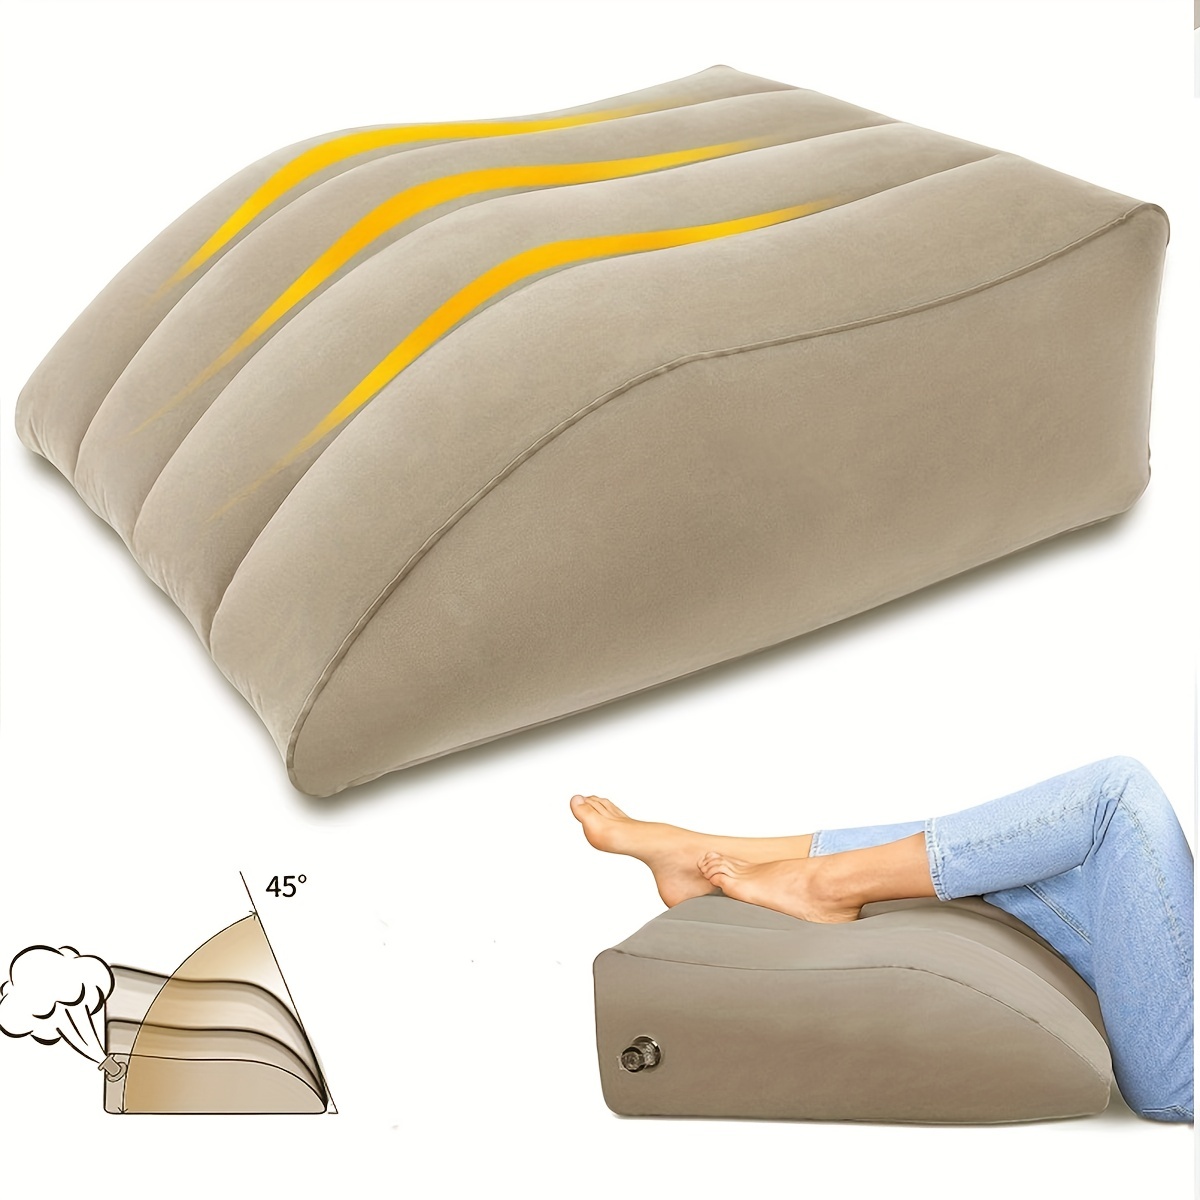 Leg Elevation Pillows, Inflatable Wedge Pillows for Sleeping, Comfort Leg Pillows Improve Circulation, Suitable for Relax Muscles & Comfort Swelling